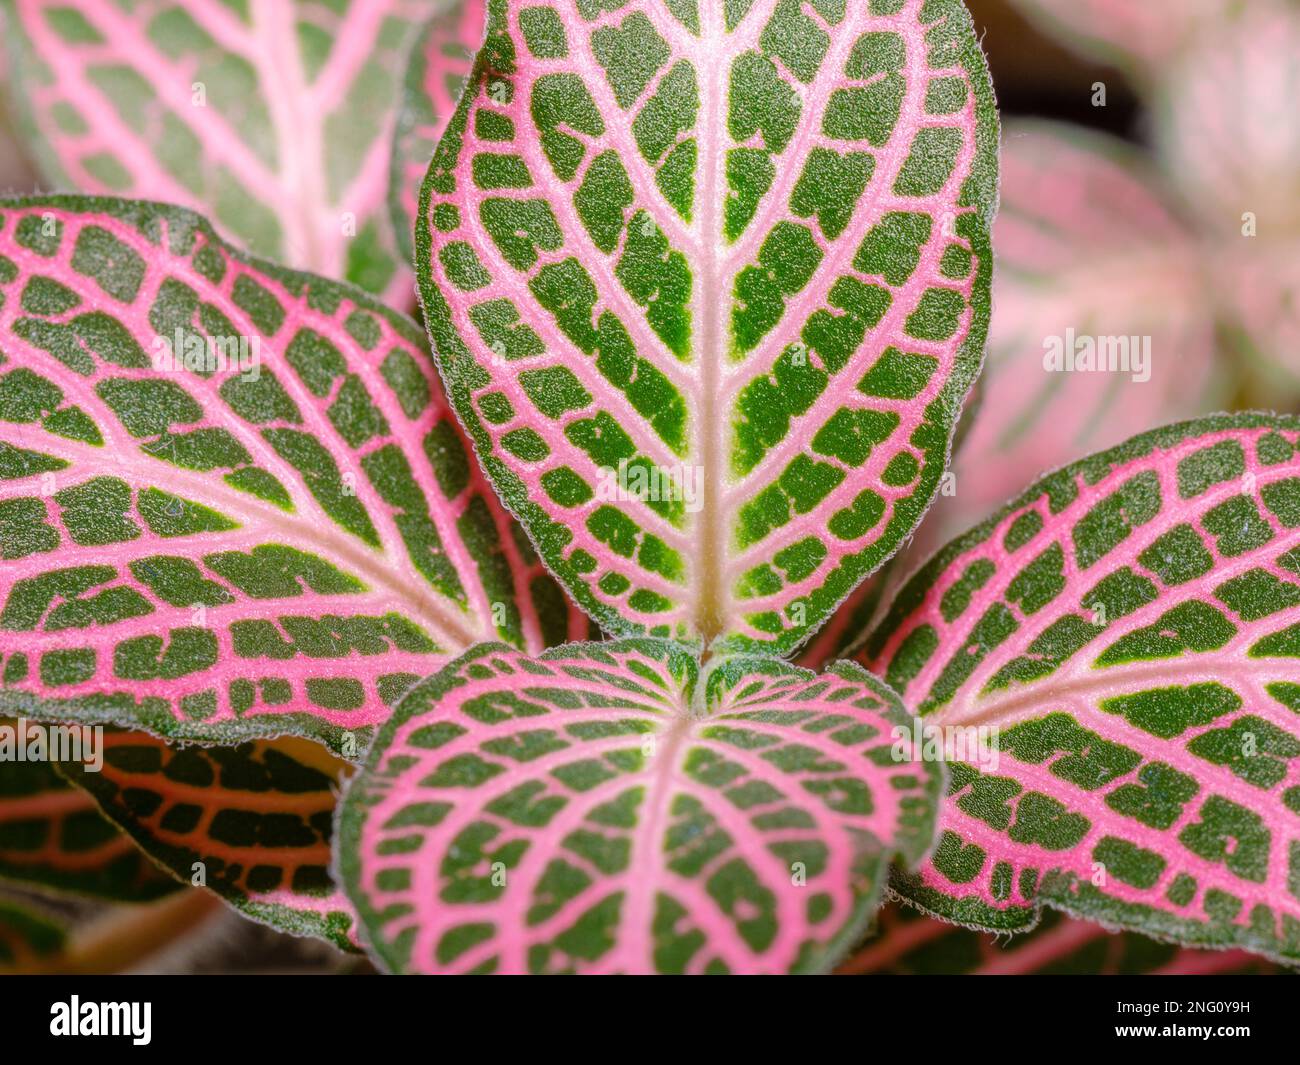 Mosaic plant is a tropical plant from South America that prefers shade. Stock Photo